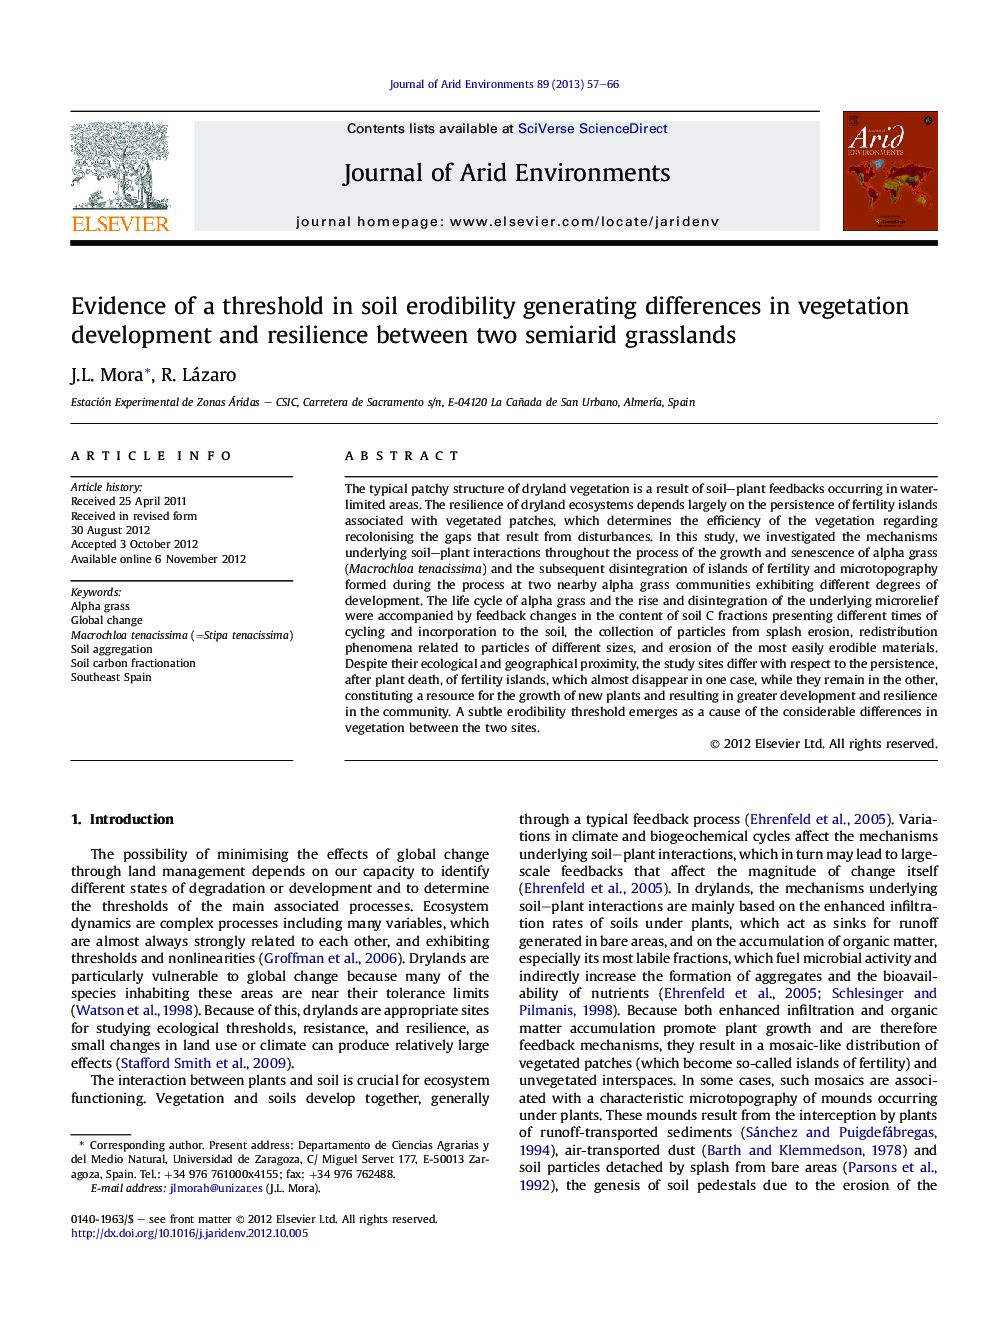 Evidence of a threshold in soil erodibility generating differences in vegetation development and resilience between two semiarid grasslands